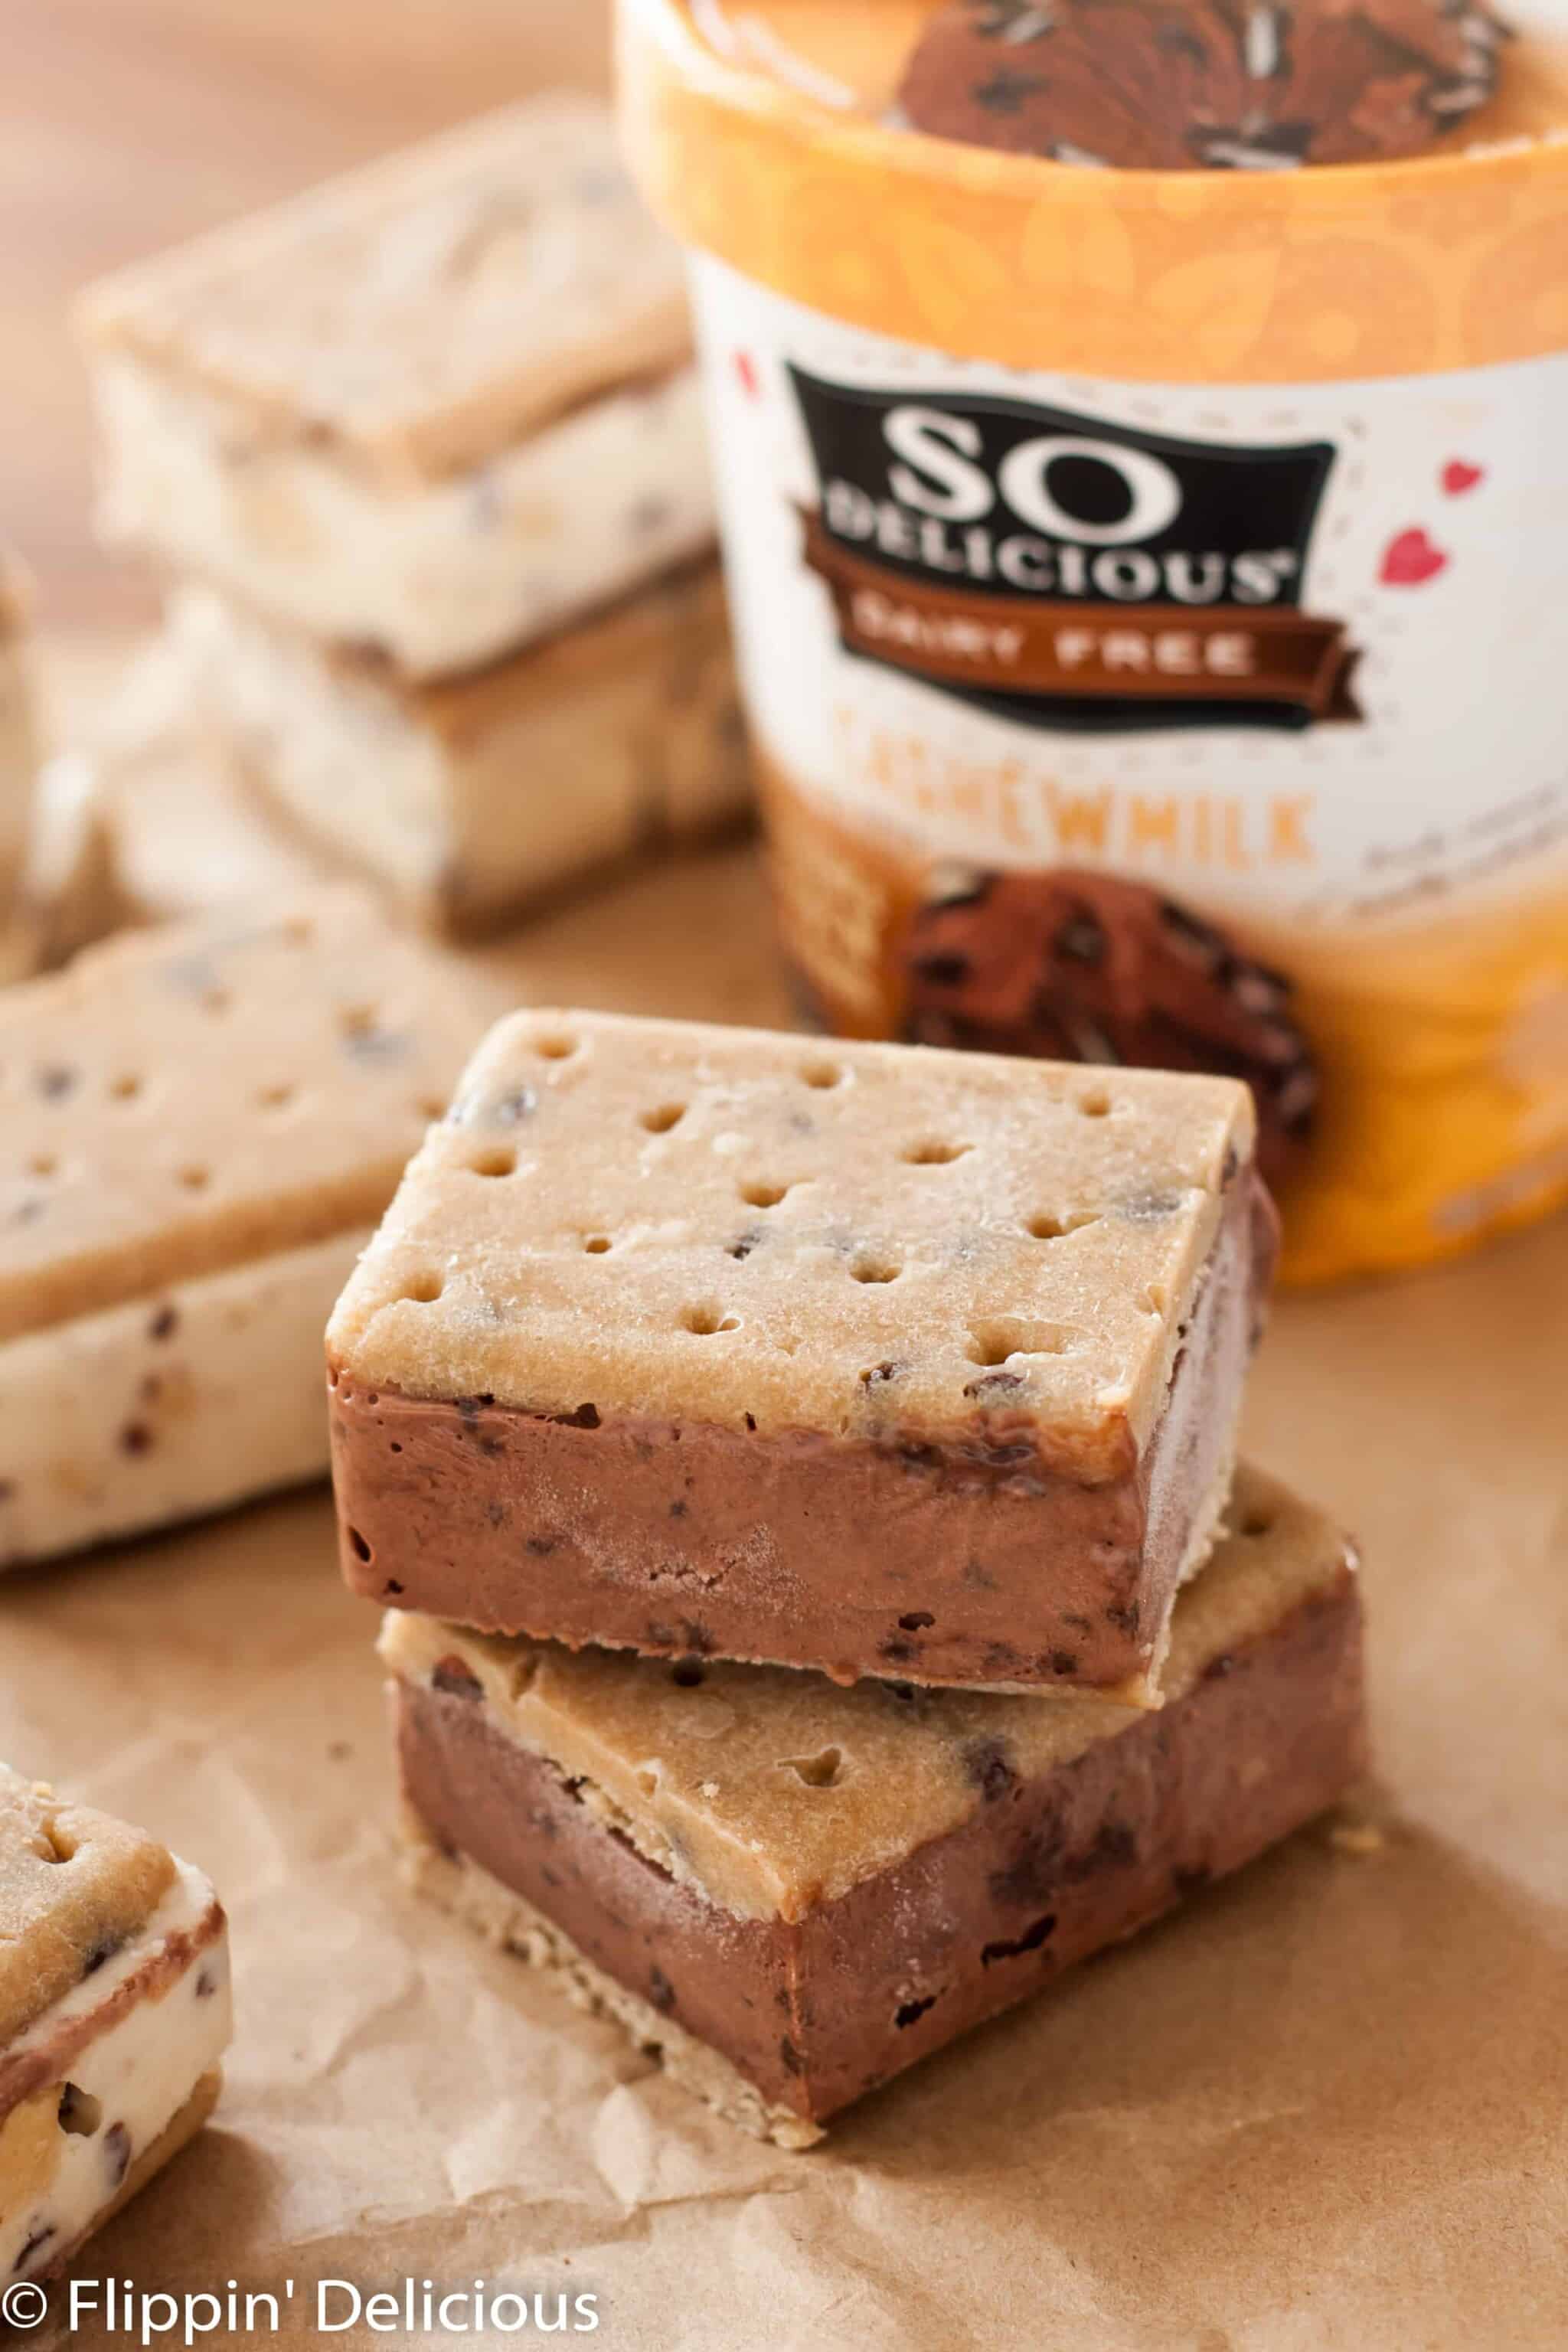 Gluten-free cookie dough ice cream sandwiches will make any cookie-dough-fan swoon. They are dairy-free and vegan, so the whole family can enjoy them.